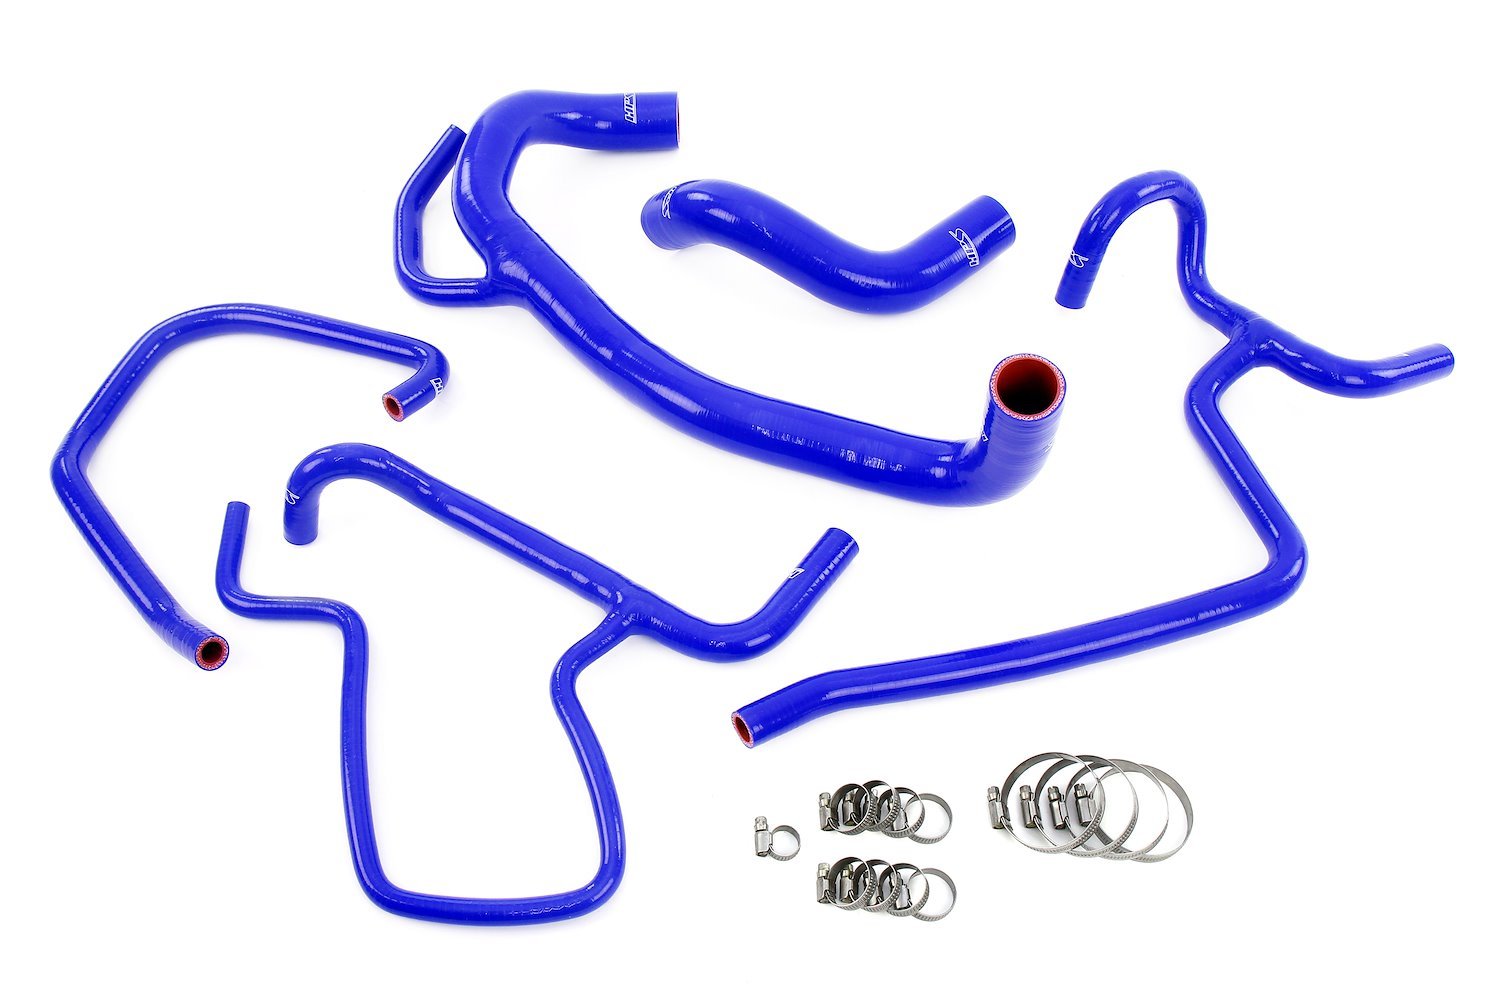 57-1616-BLUE Radiator and Heater Hose Kit, 3-Ply Reinforced Silicone, Replaces Rubber Radiator & Heater Coolant Hoses